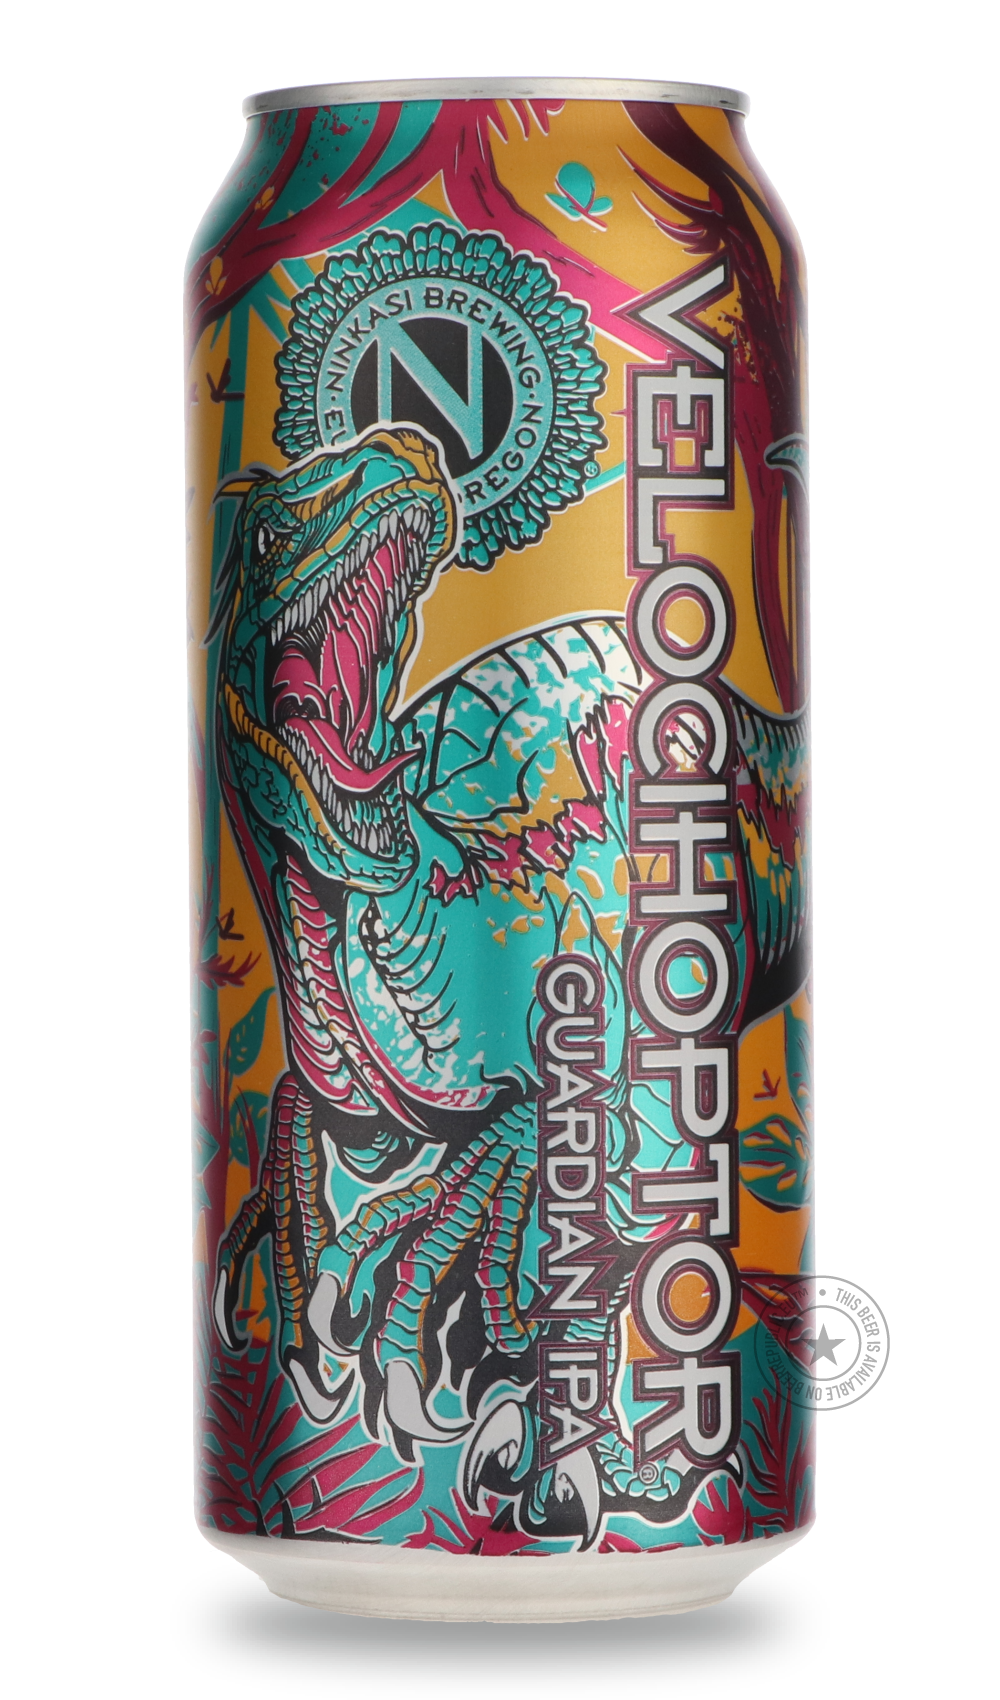 -Ninkasi- Velocihoptor-IPA- Only @ Beer Republic - The best online beer store for American & Canadian craft beer - Buy beer online from the USA and Canada - Bier online kopen - Amerikaans bier kopen - Craft beer store - Craft beer kopen - Amerikanisch bier kaufen - Bier online kaufen - Acheter biere online - IPA - Stout - Porter - New England IPA - Hazy IPA - Imperial Stout - Barrel Aged - Barrel Aged Imperial Stout - Brown - Dark beer - Blond - Blonde - Pilsner - Lager - Wheat - Weizen - Amber - Barley Win